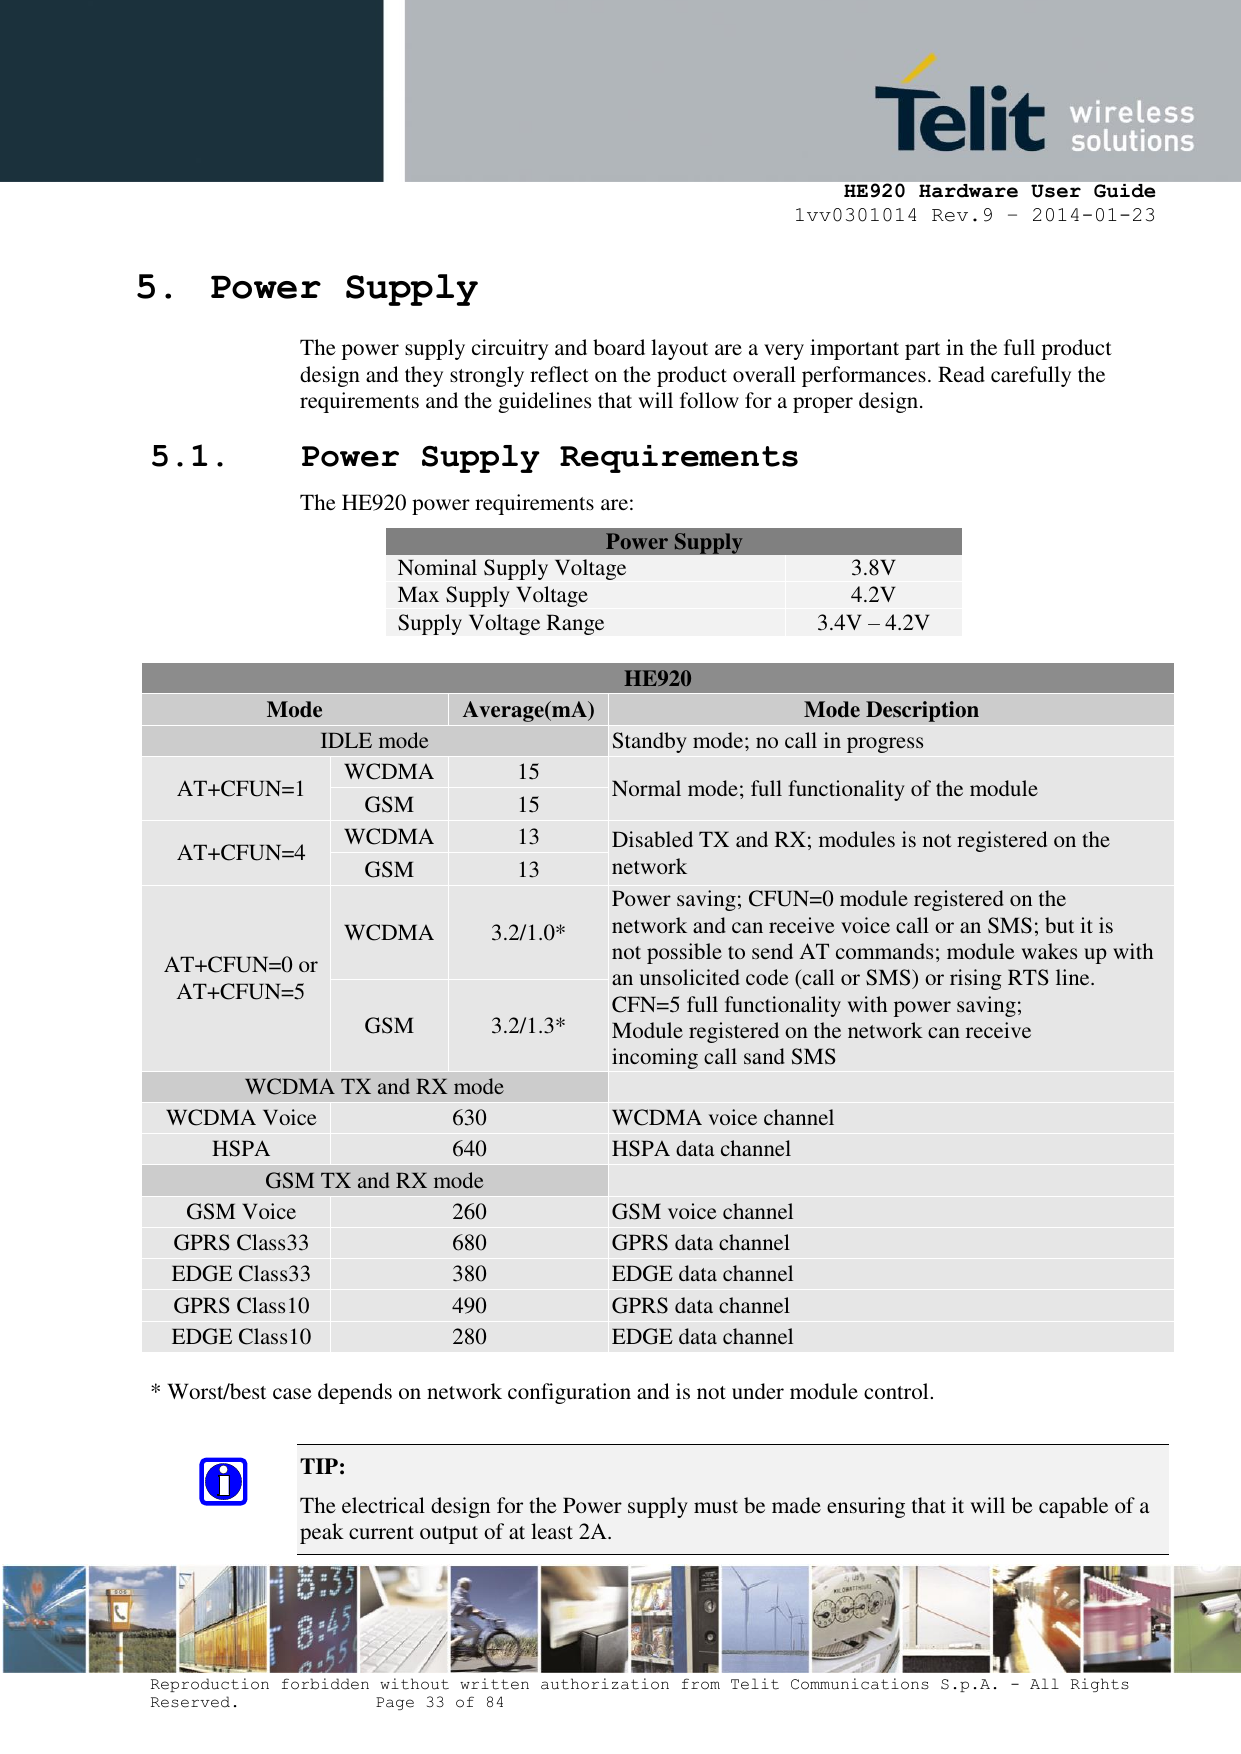     HE920 Hardware User Guide 1vv0301014 Rev.9 – 2014-01-23 Reproduction forbidden without written authorization from Telit Communications S.p.A. - All Rights Reserved.    Page 33 of 84  5. Power Supply The power supply circuitry and board layout are a very important part in the full product design and they strongly reflect on the product overall performances. Read carefully the requirements and the guidelines that will follow for a proper design. 5.1. Power Supply Requirements The HE920 power requirements are: Power Supply Nominal Supply Voltage 3.8V Max Supply Voltage 4.2V Supply Voltage Range 3.4V – 4.2V  HE920 Mode Average(mA) Mode Description IDLE mode Standby mode; no call in progress AT+CFUN=1 WCDMA 15 Normal mode; full functionality of the module GSM 15 AT+CFUN=4 WCDMA 13 Disabled TX and RX; modules is not registered on the network GSM 13 AT+CFUN=0 or AT+CFUN=5 WCDMA 3.2/1.0* Power saving; CFUN=0 module registered on the network and can receive voice call or an SMS; but it is not possible to send AT commands; module wakes up with an unsolicited code (call or SMS) or rising RTS line. CFN=5 full functionality with power saving; Module registered on the network can receive  incoming call sand SMS GSM 3.2/1.3* WCDMA TX and RX mode  WCDMA Voice 630 WCDMA voice channel HSPA 640 HSPA data channel  GSM TX and RX mode  GSM Voice 260 GSM voice channel GPRS Class33 680 GPRS data channel EDGE Class33 380 EDGE data channel GPRS Class10 490 GPRS data channel EDGE Class10 280 EDGE data channel  * Worst/best case depends on network configuration and is not under module control.  TIP:  The electrical design for the Power supply must be made ensuring that it will be capable of a peak current output of at least 2A. 